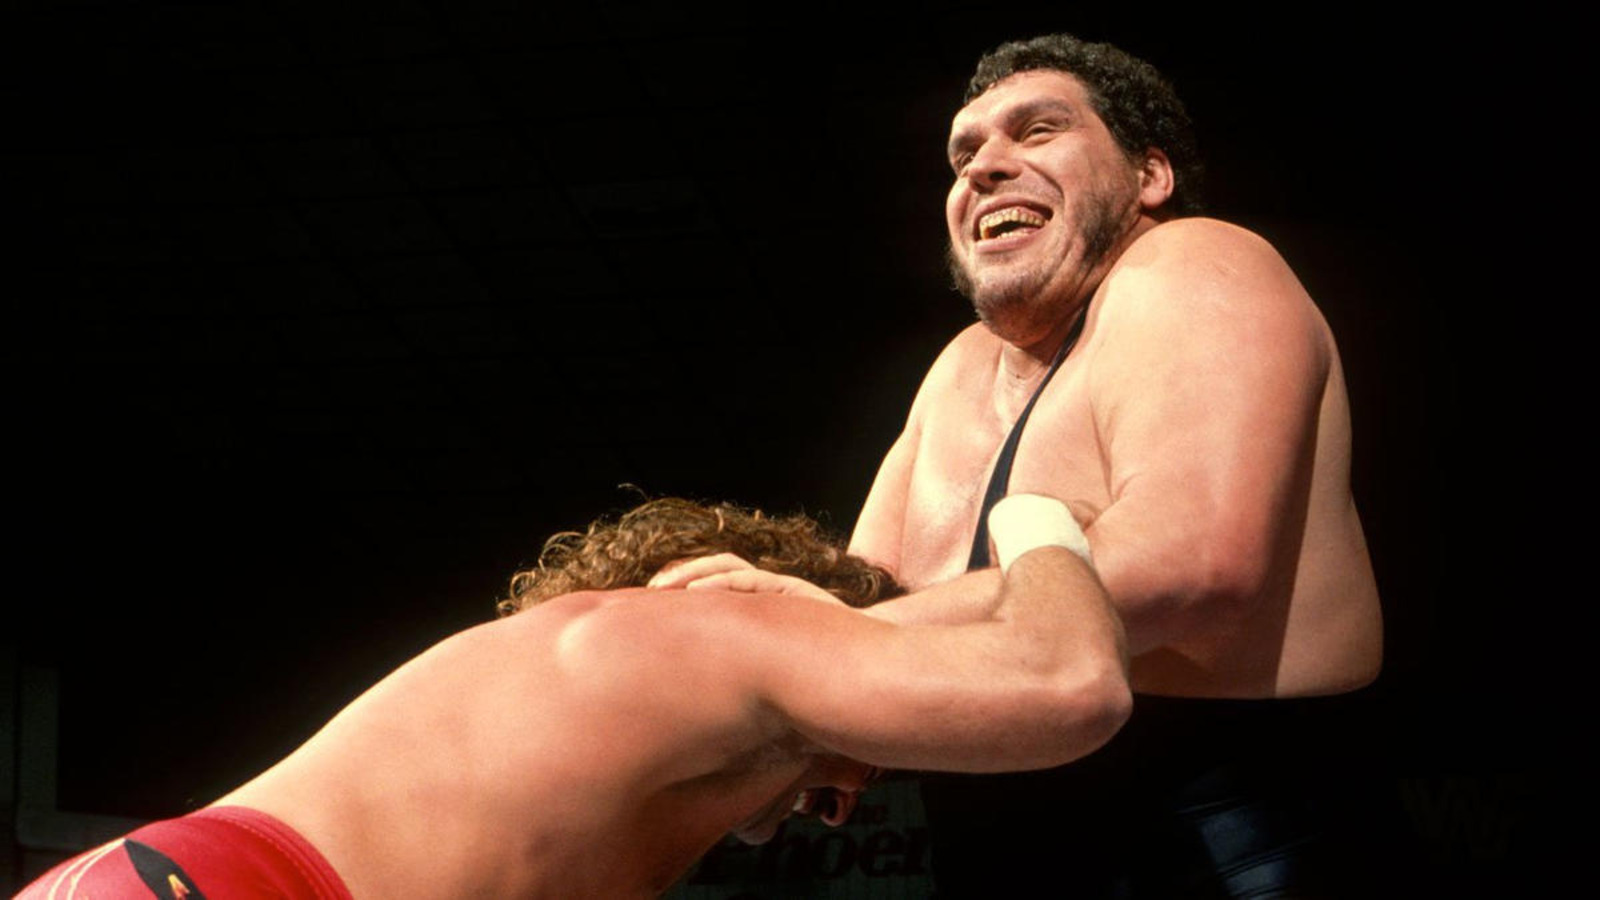 WrestleMania 39: Inside the mad world of WWE - Andre The Giant drank 108  beers in 45 MINUTES, Goldust's 'BOOB JOB' and POO in The Rock's lunch